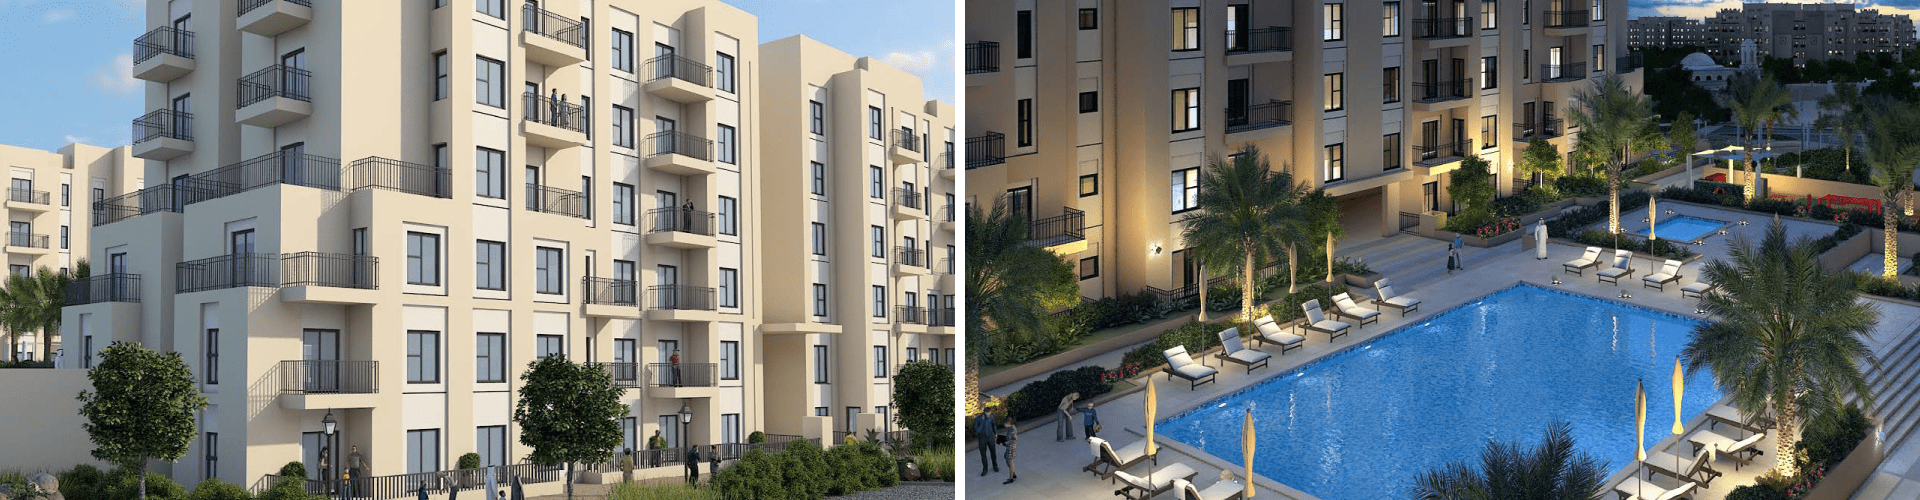 Remraam Apartments By Dubai Properties gallery 1